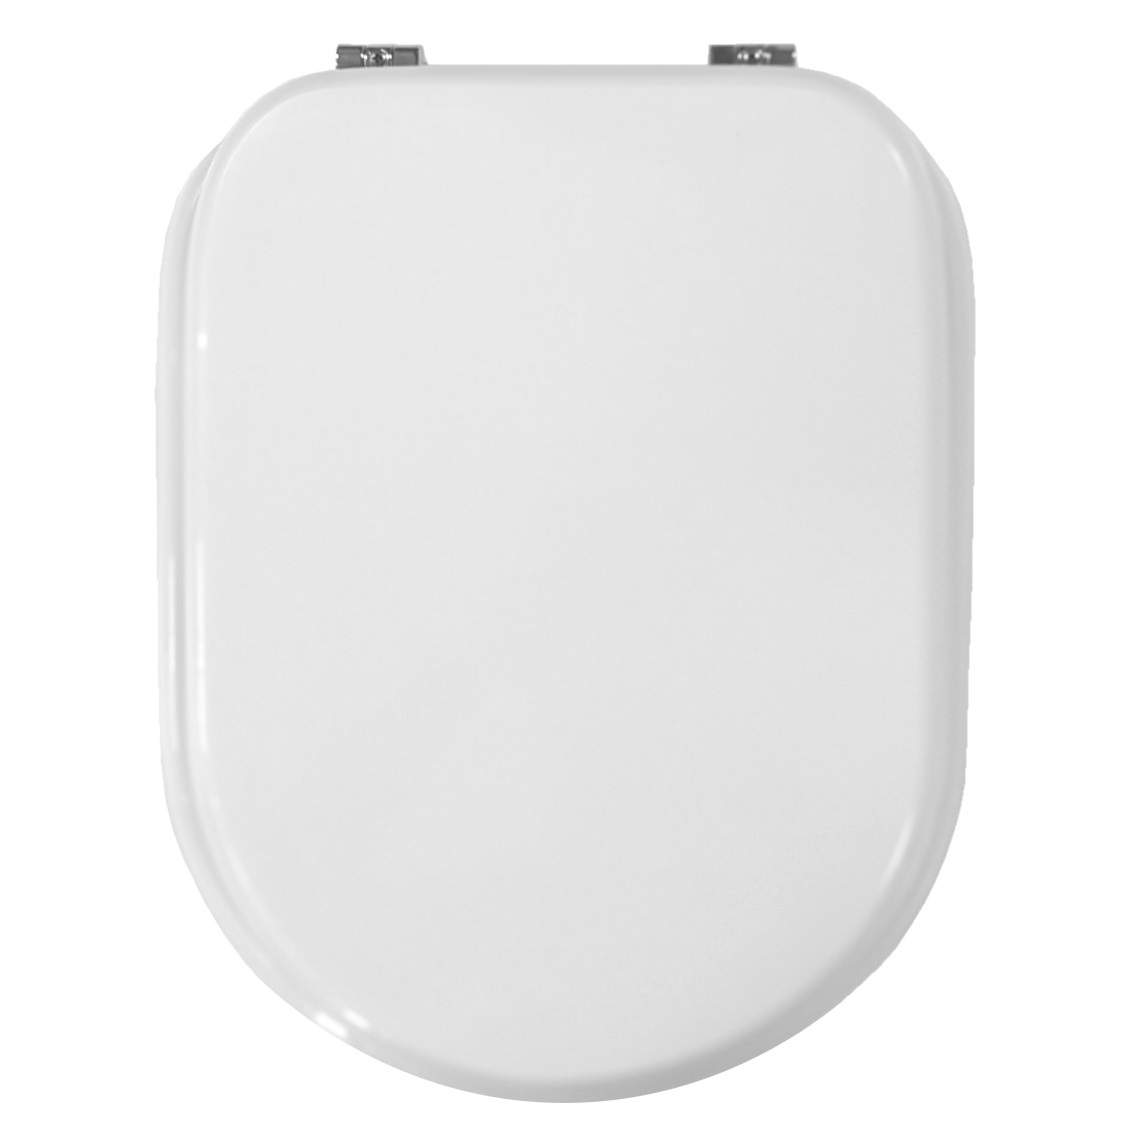 SELLES Joan white toilet seat, for wall mounted bowl